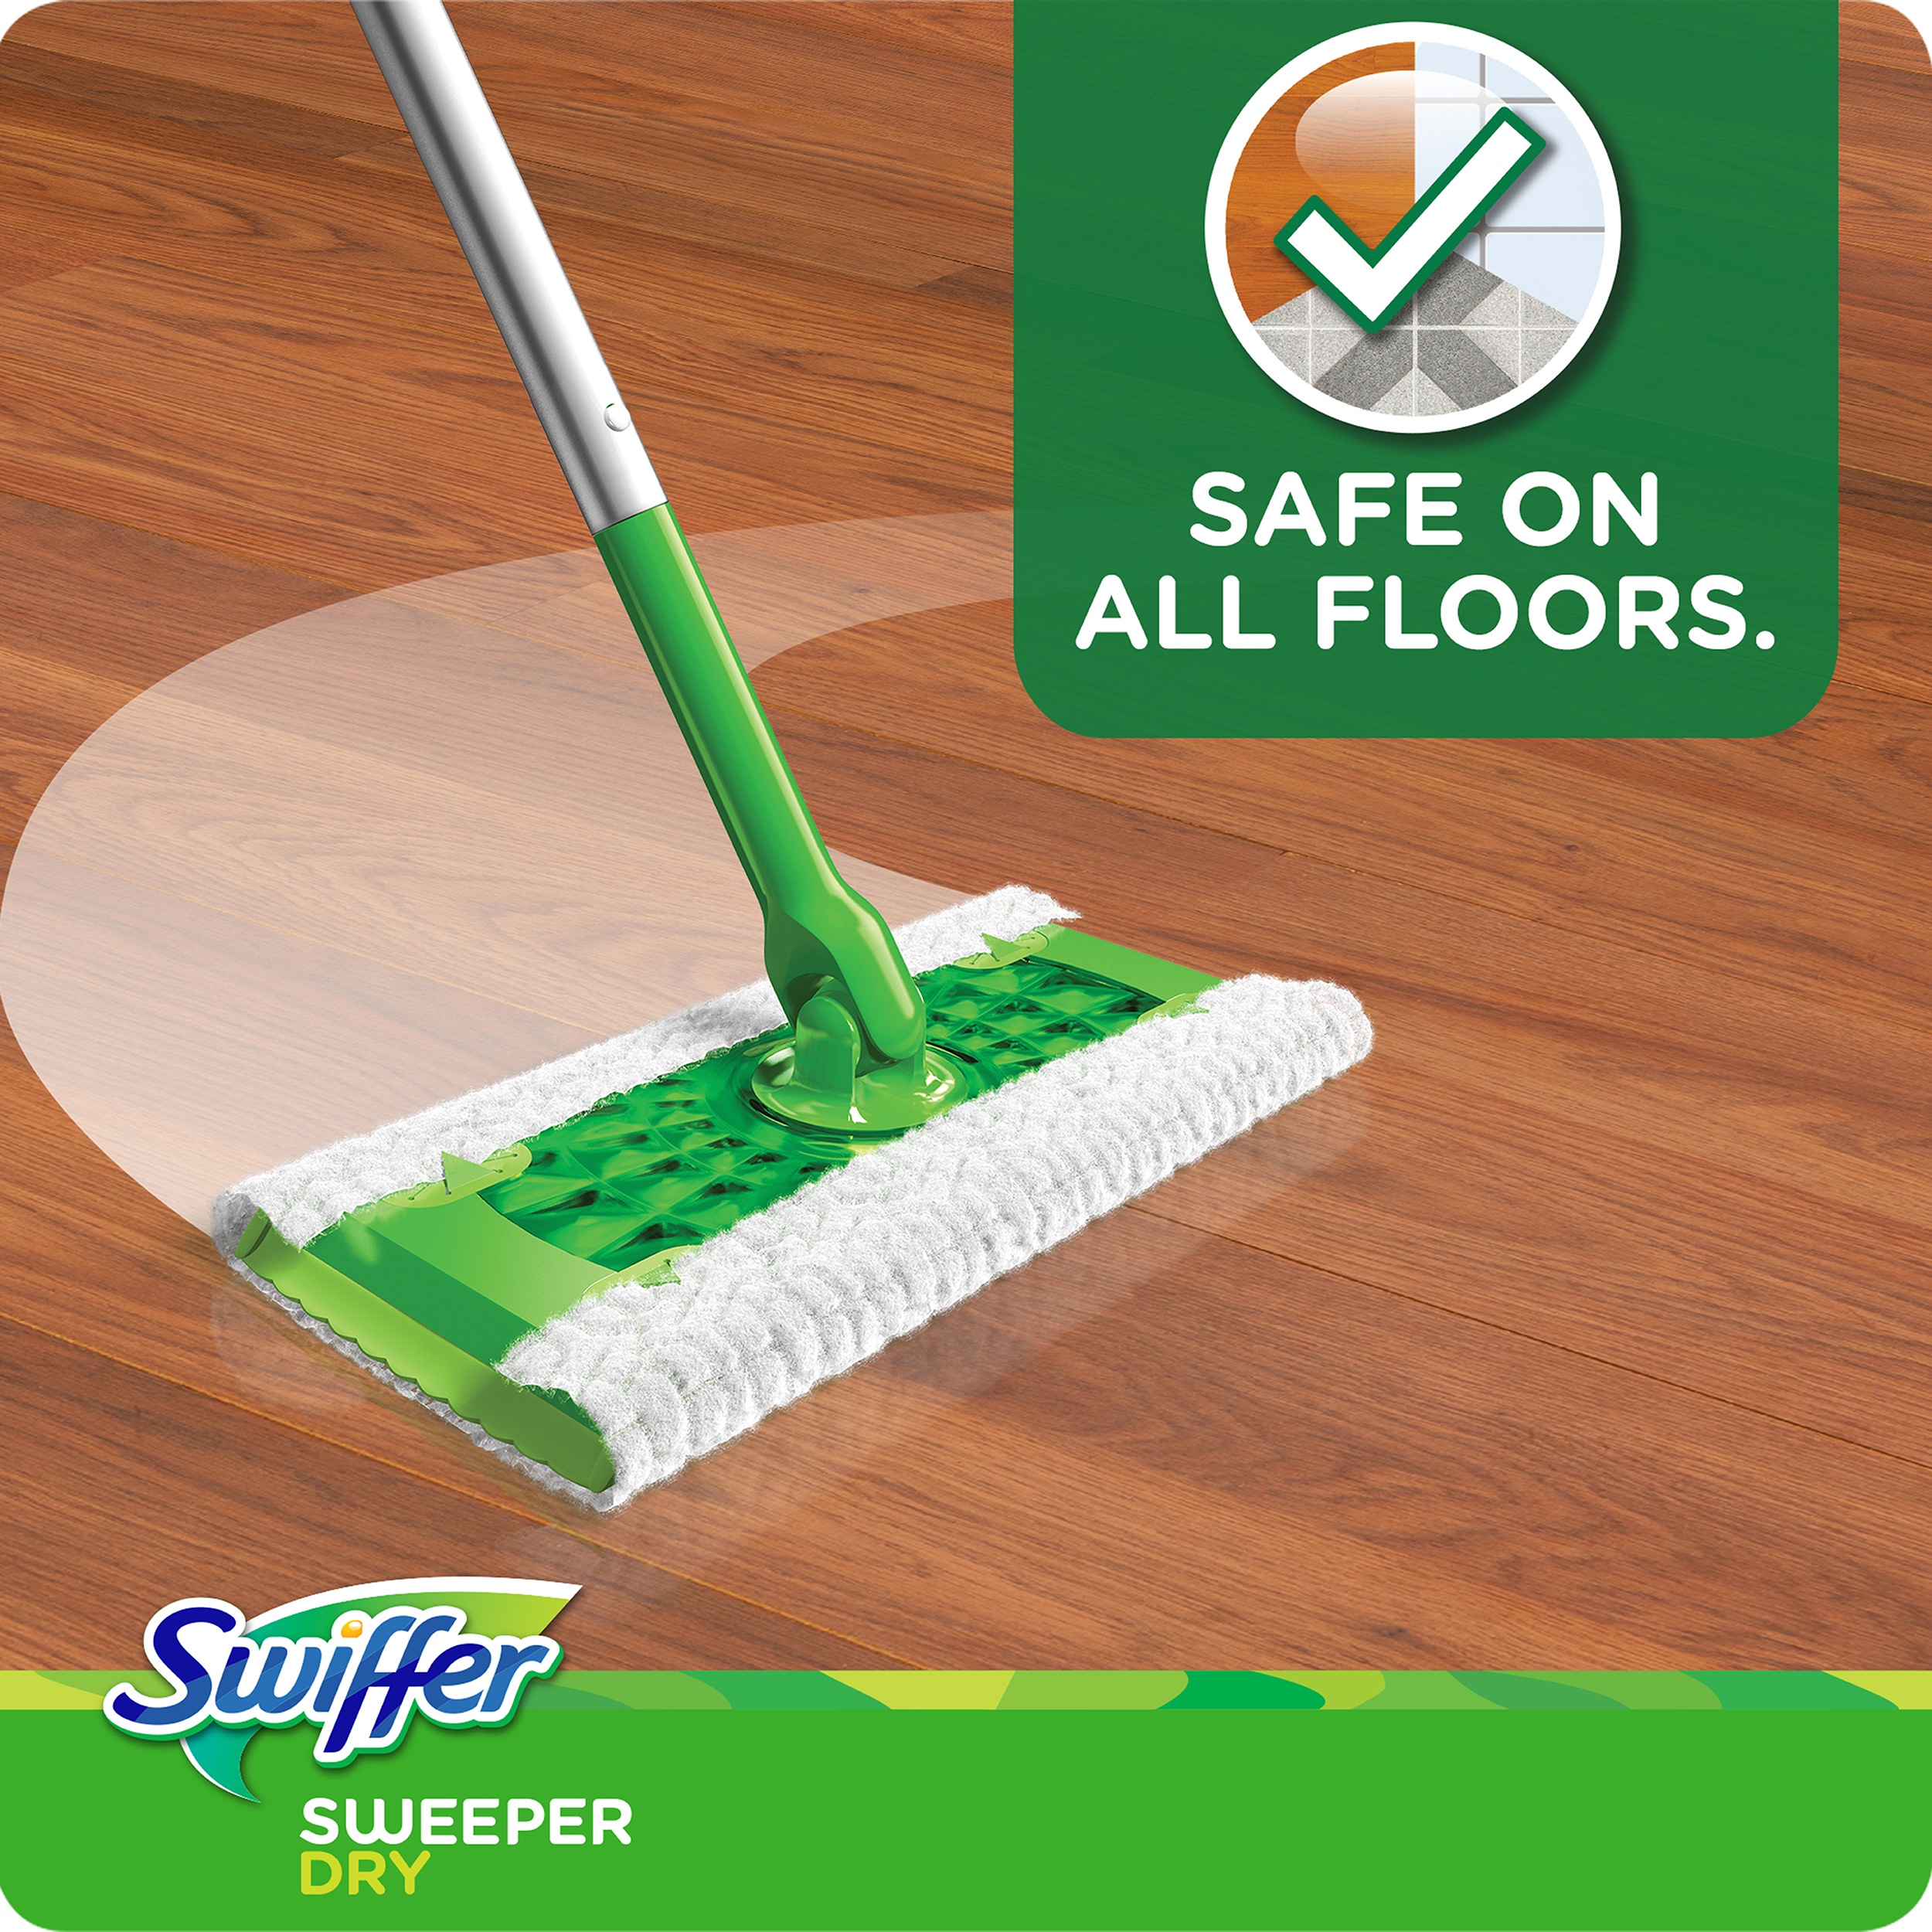 Swiffer Sweeper Dry Sweeping Pad Multi Surface Refills for Dusters Floor Mop, Gain Scent, 16 count - image 5 of 10